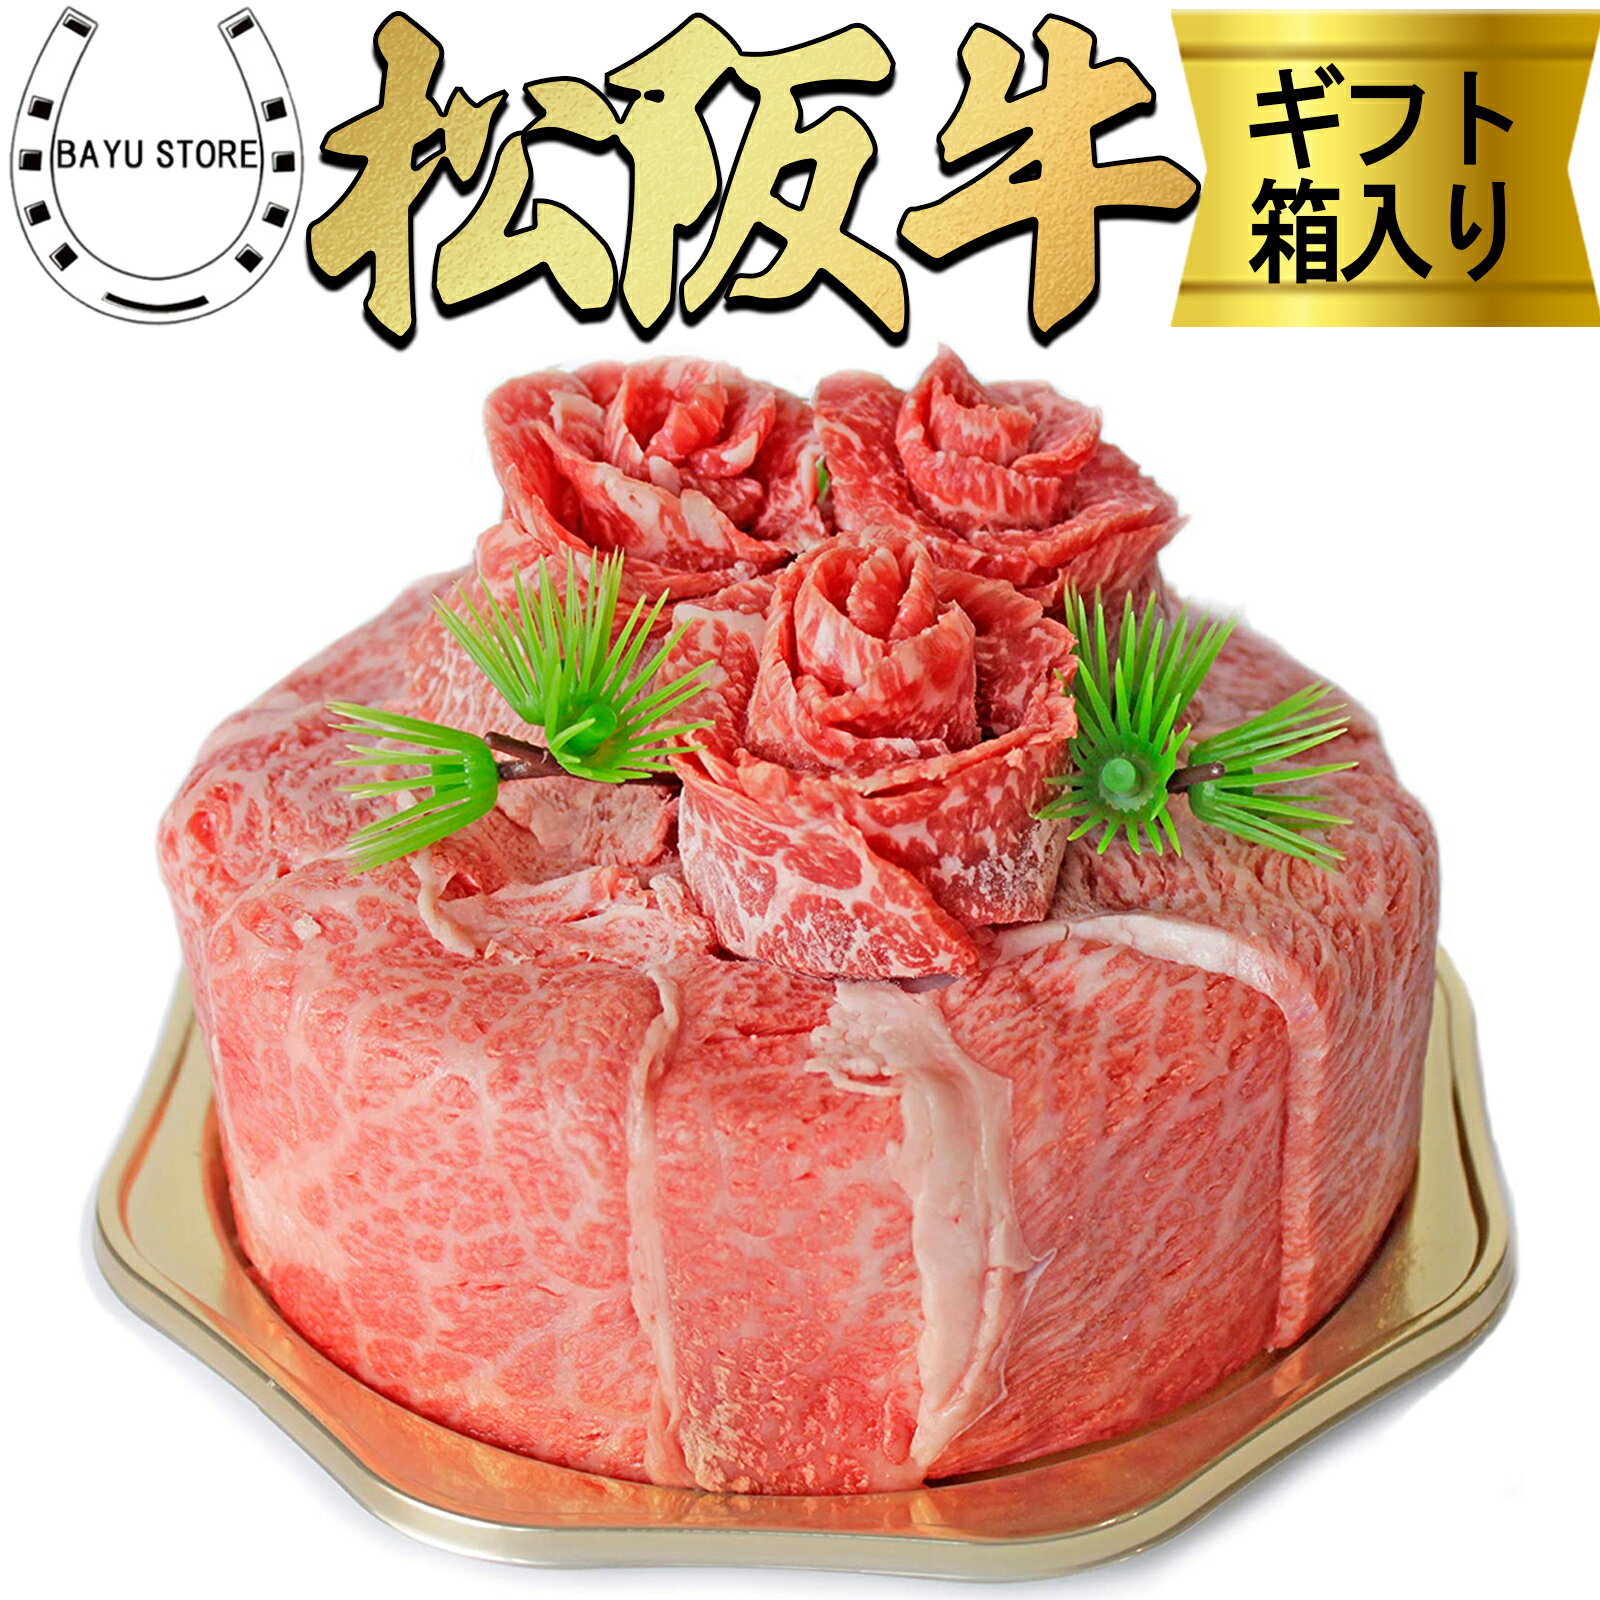 <strong>肉ケーキ</strong> 松阪牛 A5等級 ケーキ盛り 300g(2～3人前) <strong>母の日</strong> 贈り物 食べ比べ 焼肉 セット すき焼き しゃぶしゃぶ用 <strong>肉ケーキ</strong> 誕生日ケーキ 誕生日プレゼント お歳暮 ギフト 誕生日 高級 内祝い ギフト 松阪牛 焼き肉 松坂牛 送料無料 ※北海道・沖縄・離島を除く